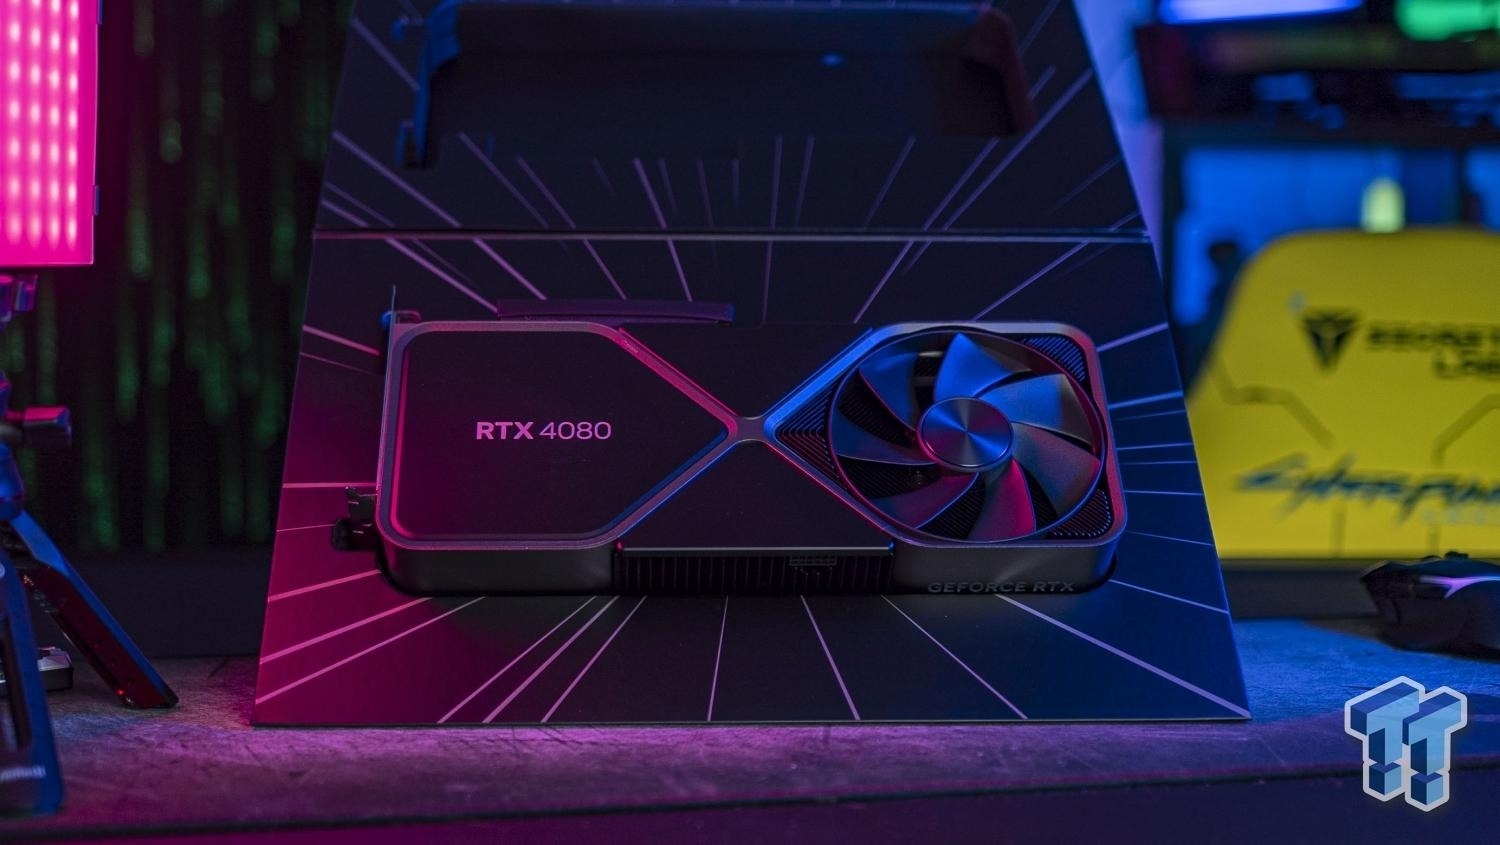 RTX 4080 Super: A Disappointing Upgrade? - GadgetMates